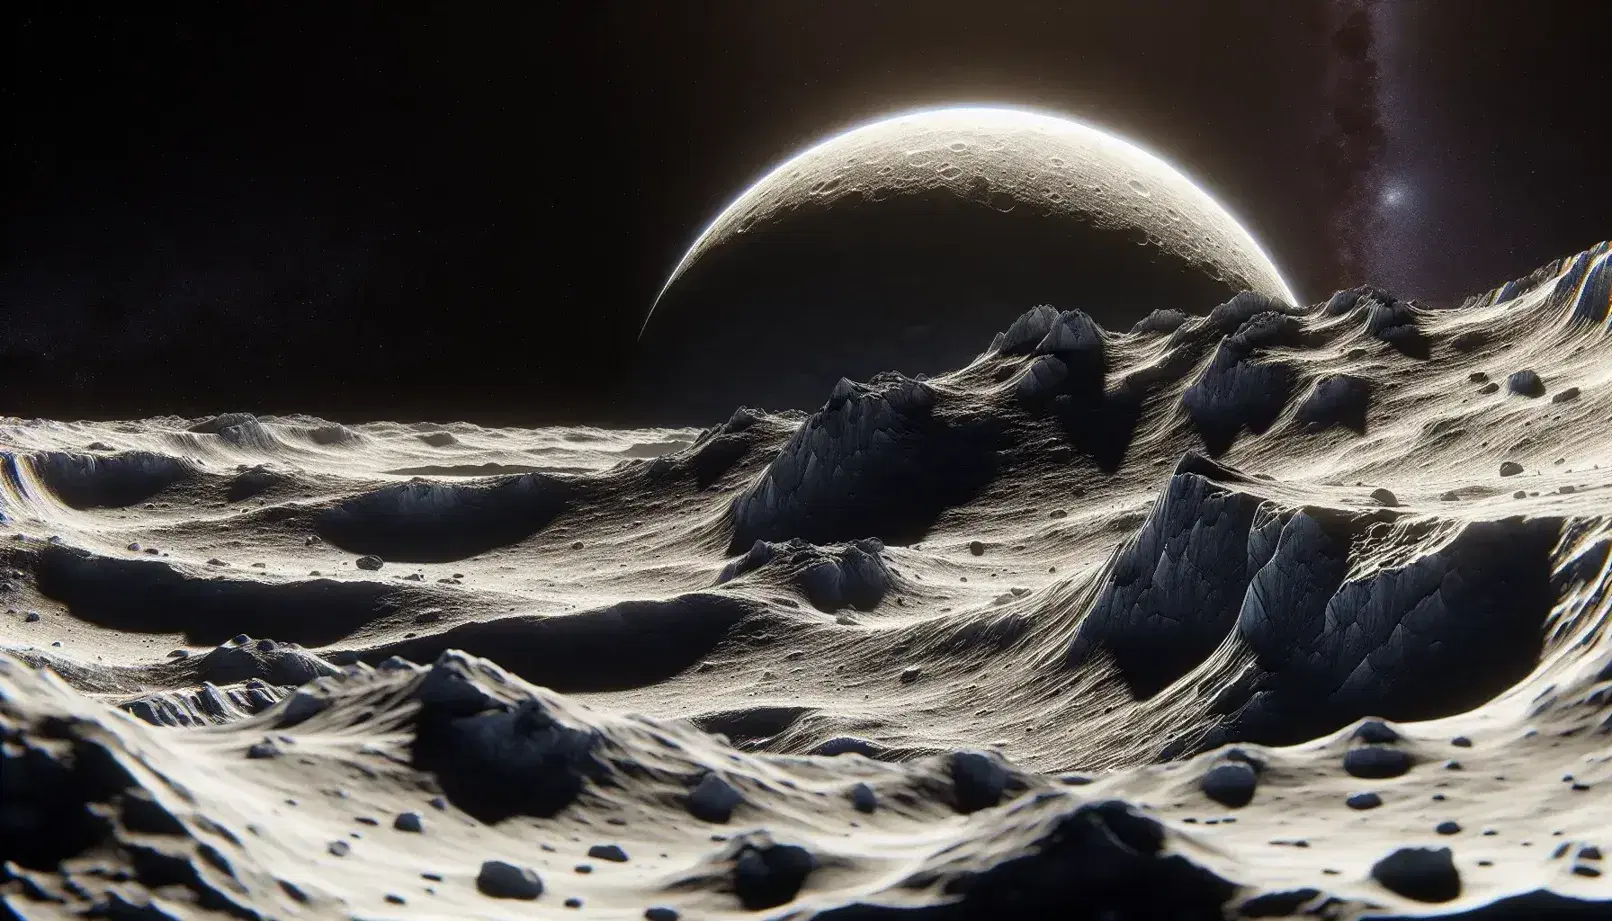 Surface of a rocky celestial body with uneven terrain and gray dust, starry horizon and large partially illuminated planet in the background.